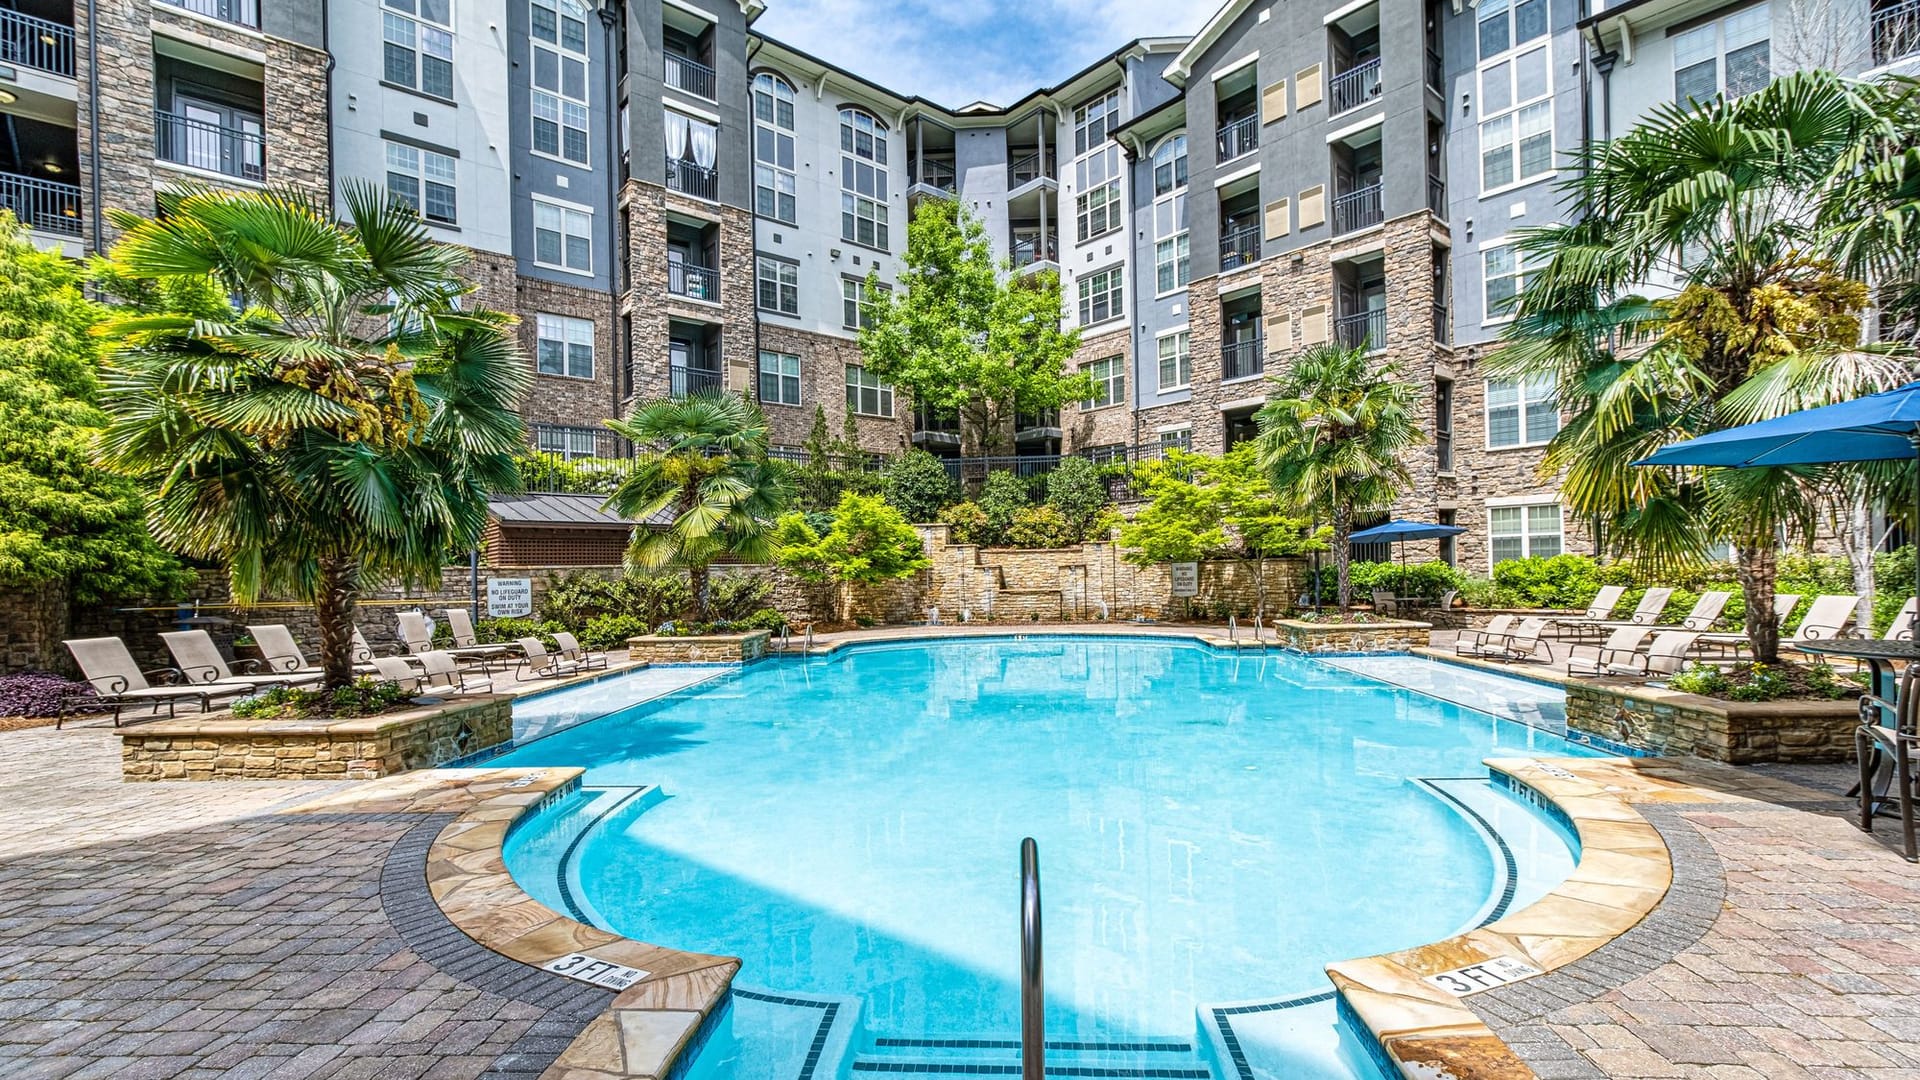 The Linc Brookhaven - Apartments in Brookhaven, GA